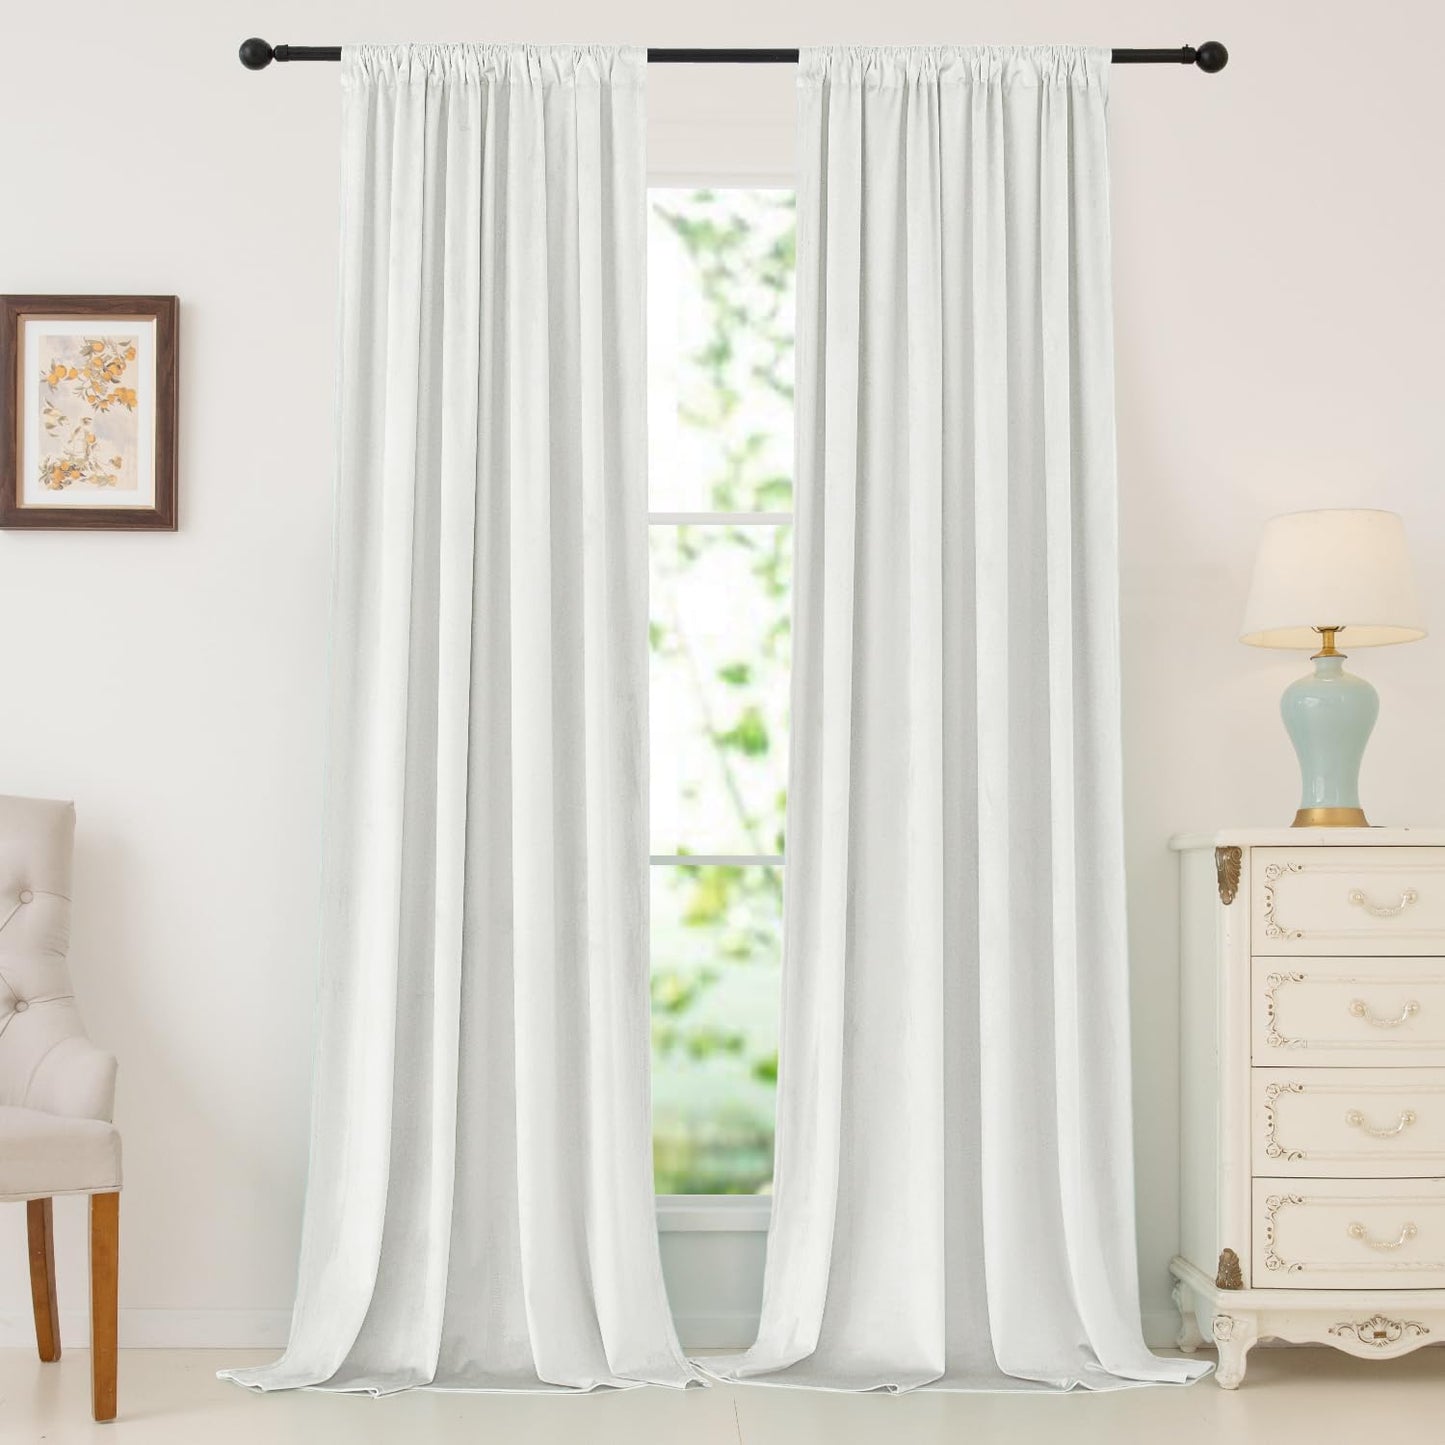 Nanbowang Green Velvet Curtains 63 Inches Long Dark Green Light Blocking Rod Pocket Window Curtain Panels Set of 2 Heat Insulated Curtains Thermal Curtain Panels for Bedroom  nanbowang Bleach 52"X120" 